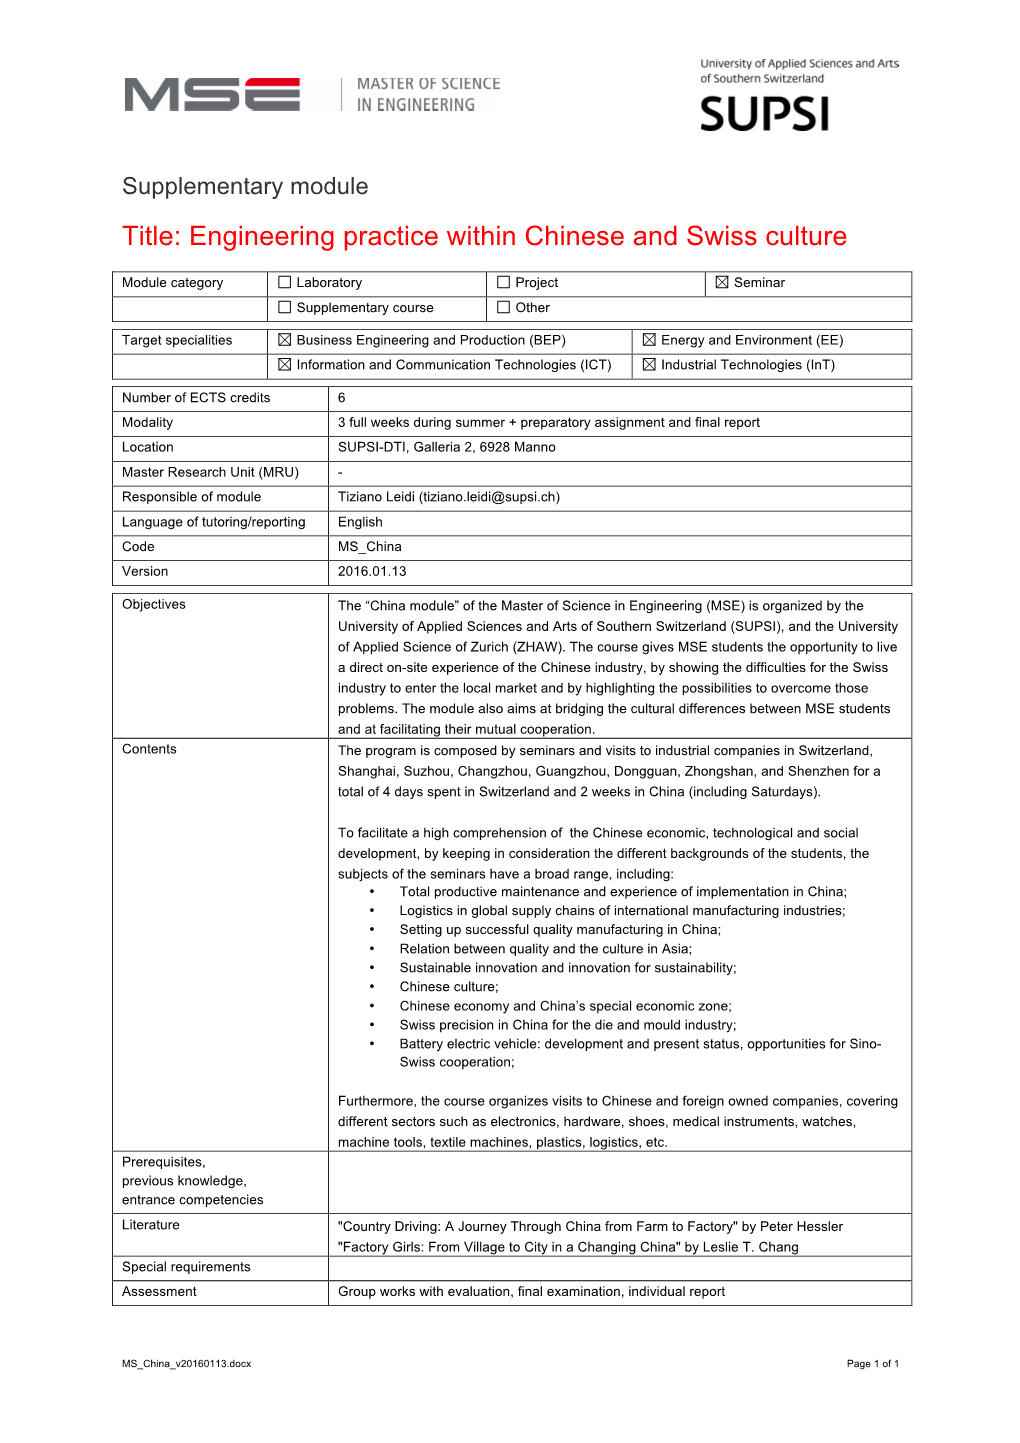 Title: Engineering Practice Within Chinese and Swiss Culture